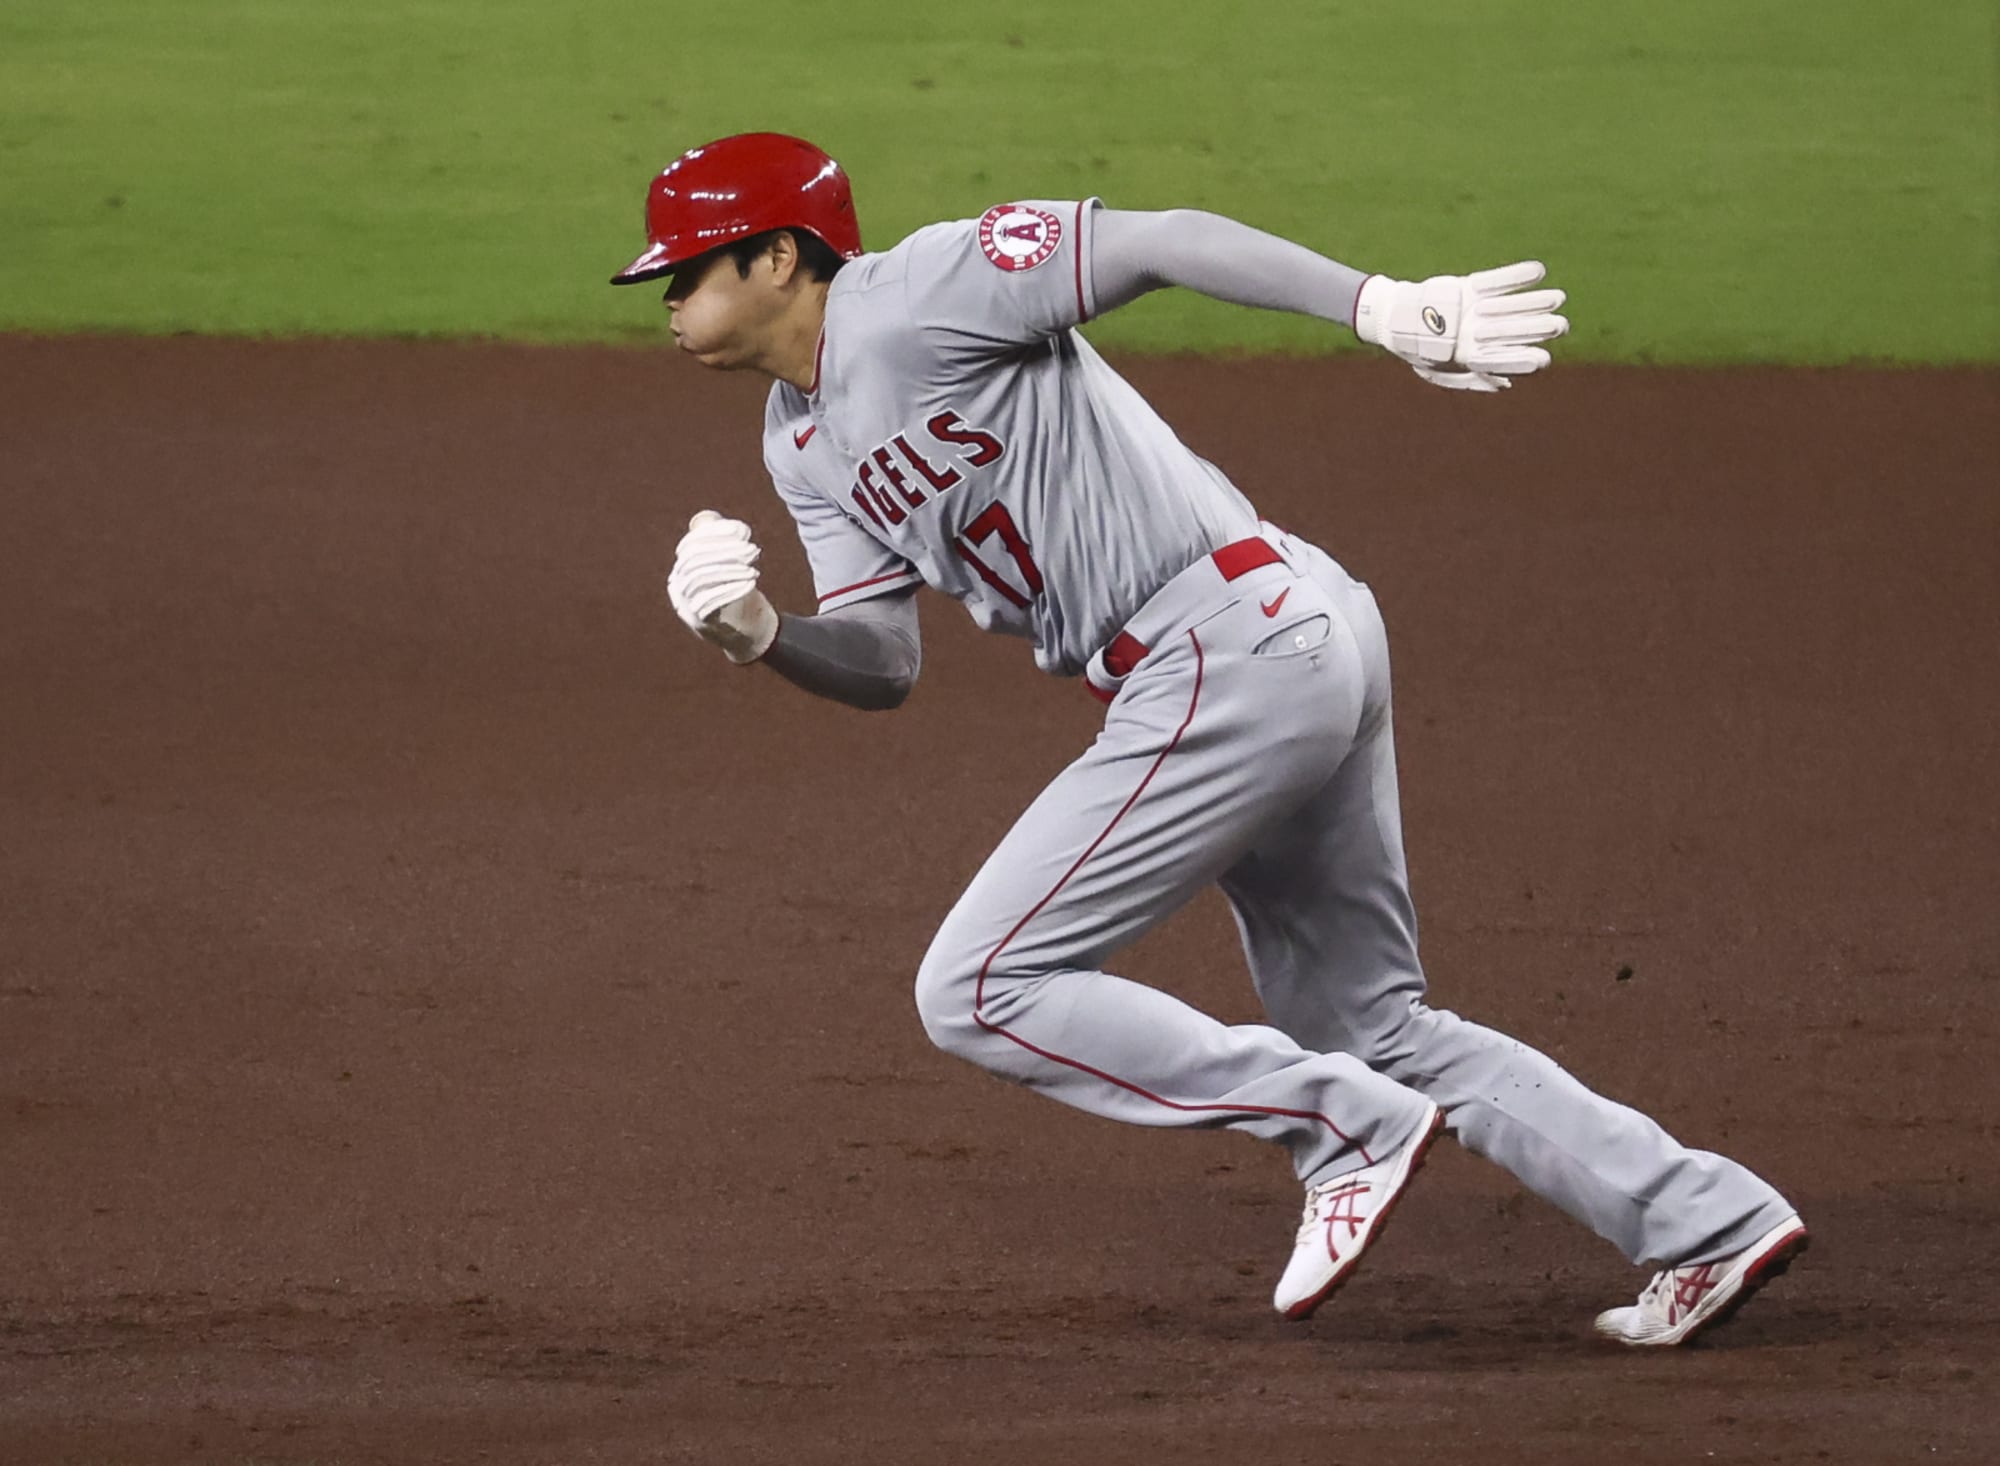 Shohei Ohtani sprinting around the bases is the new home run trot (Video)